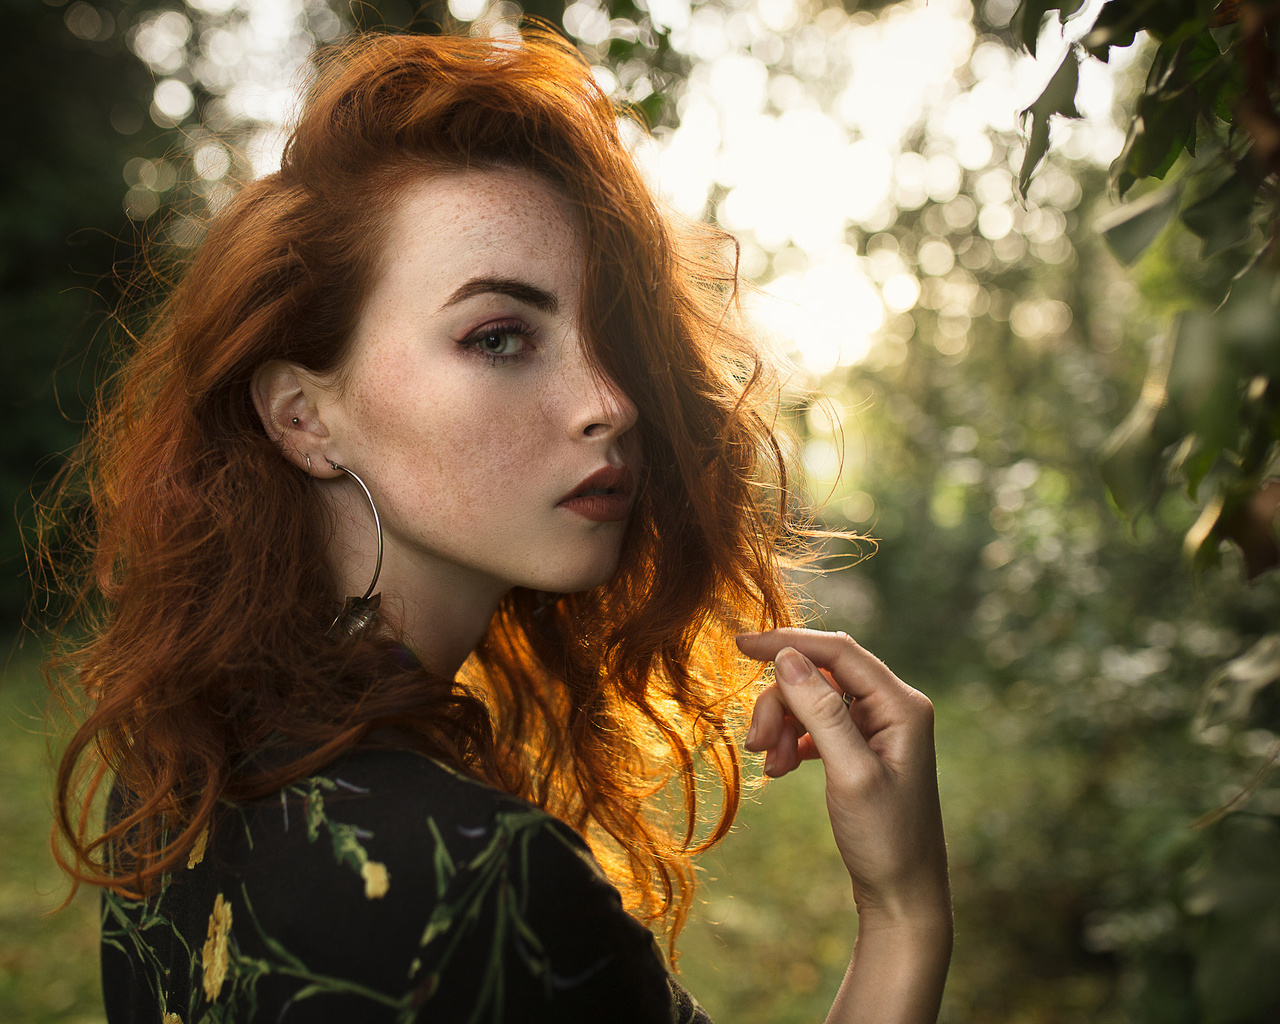 women, portrait, face, redhead, depth of field, women outdoors, freckles, vincent chassin